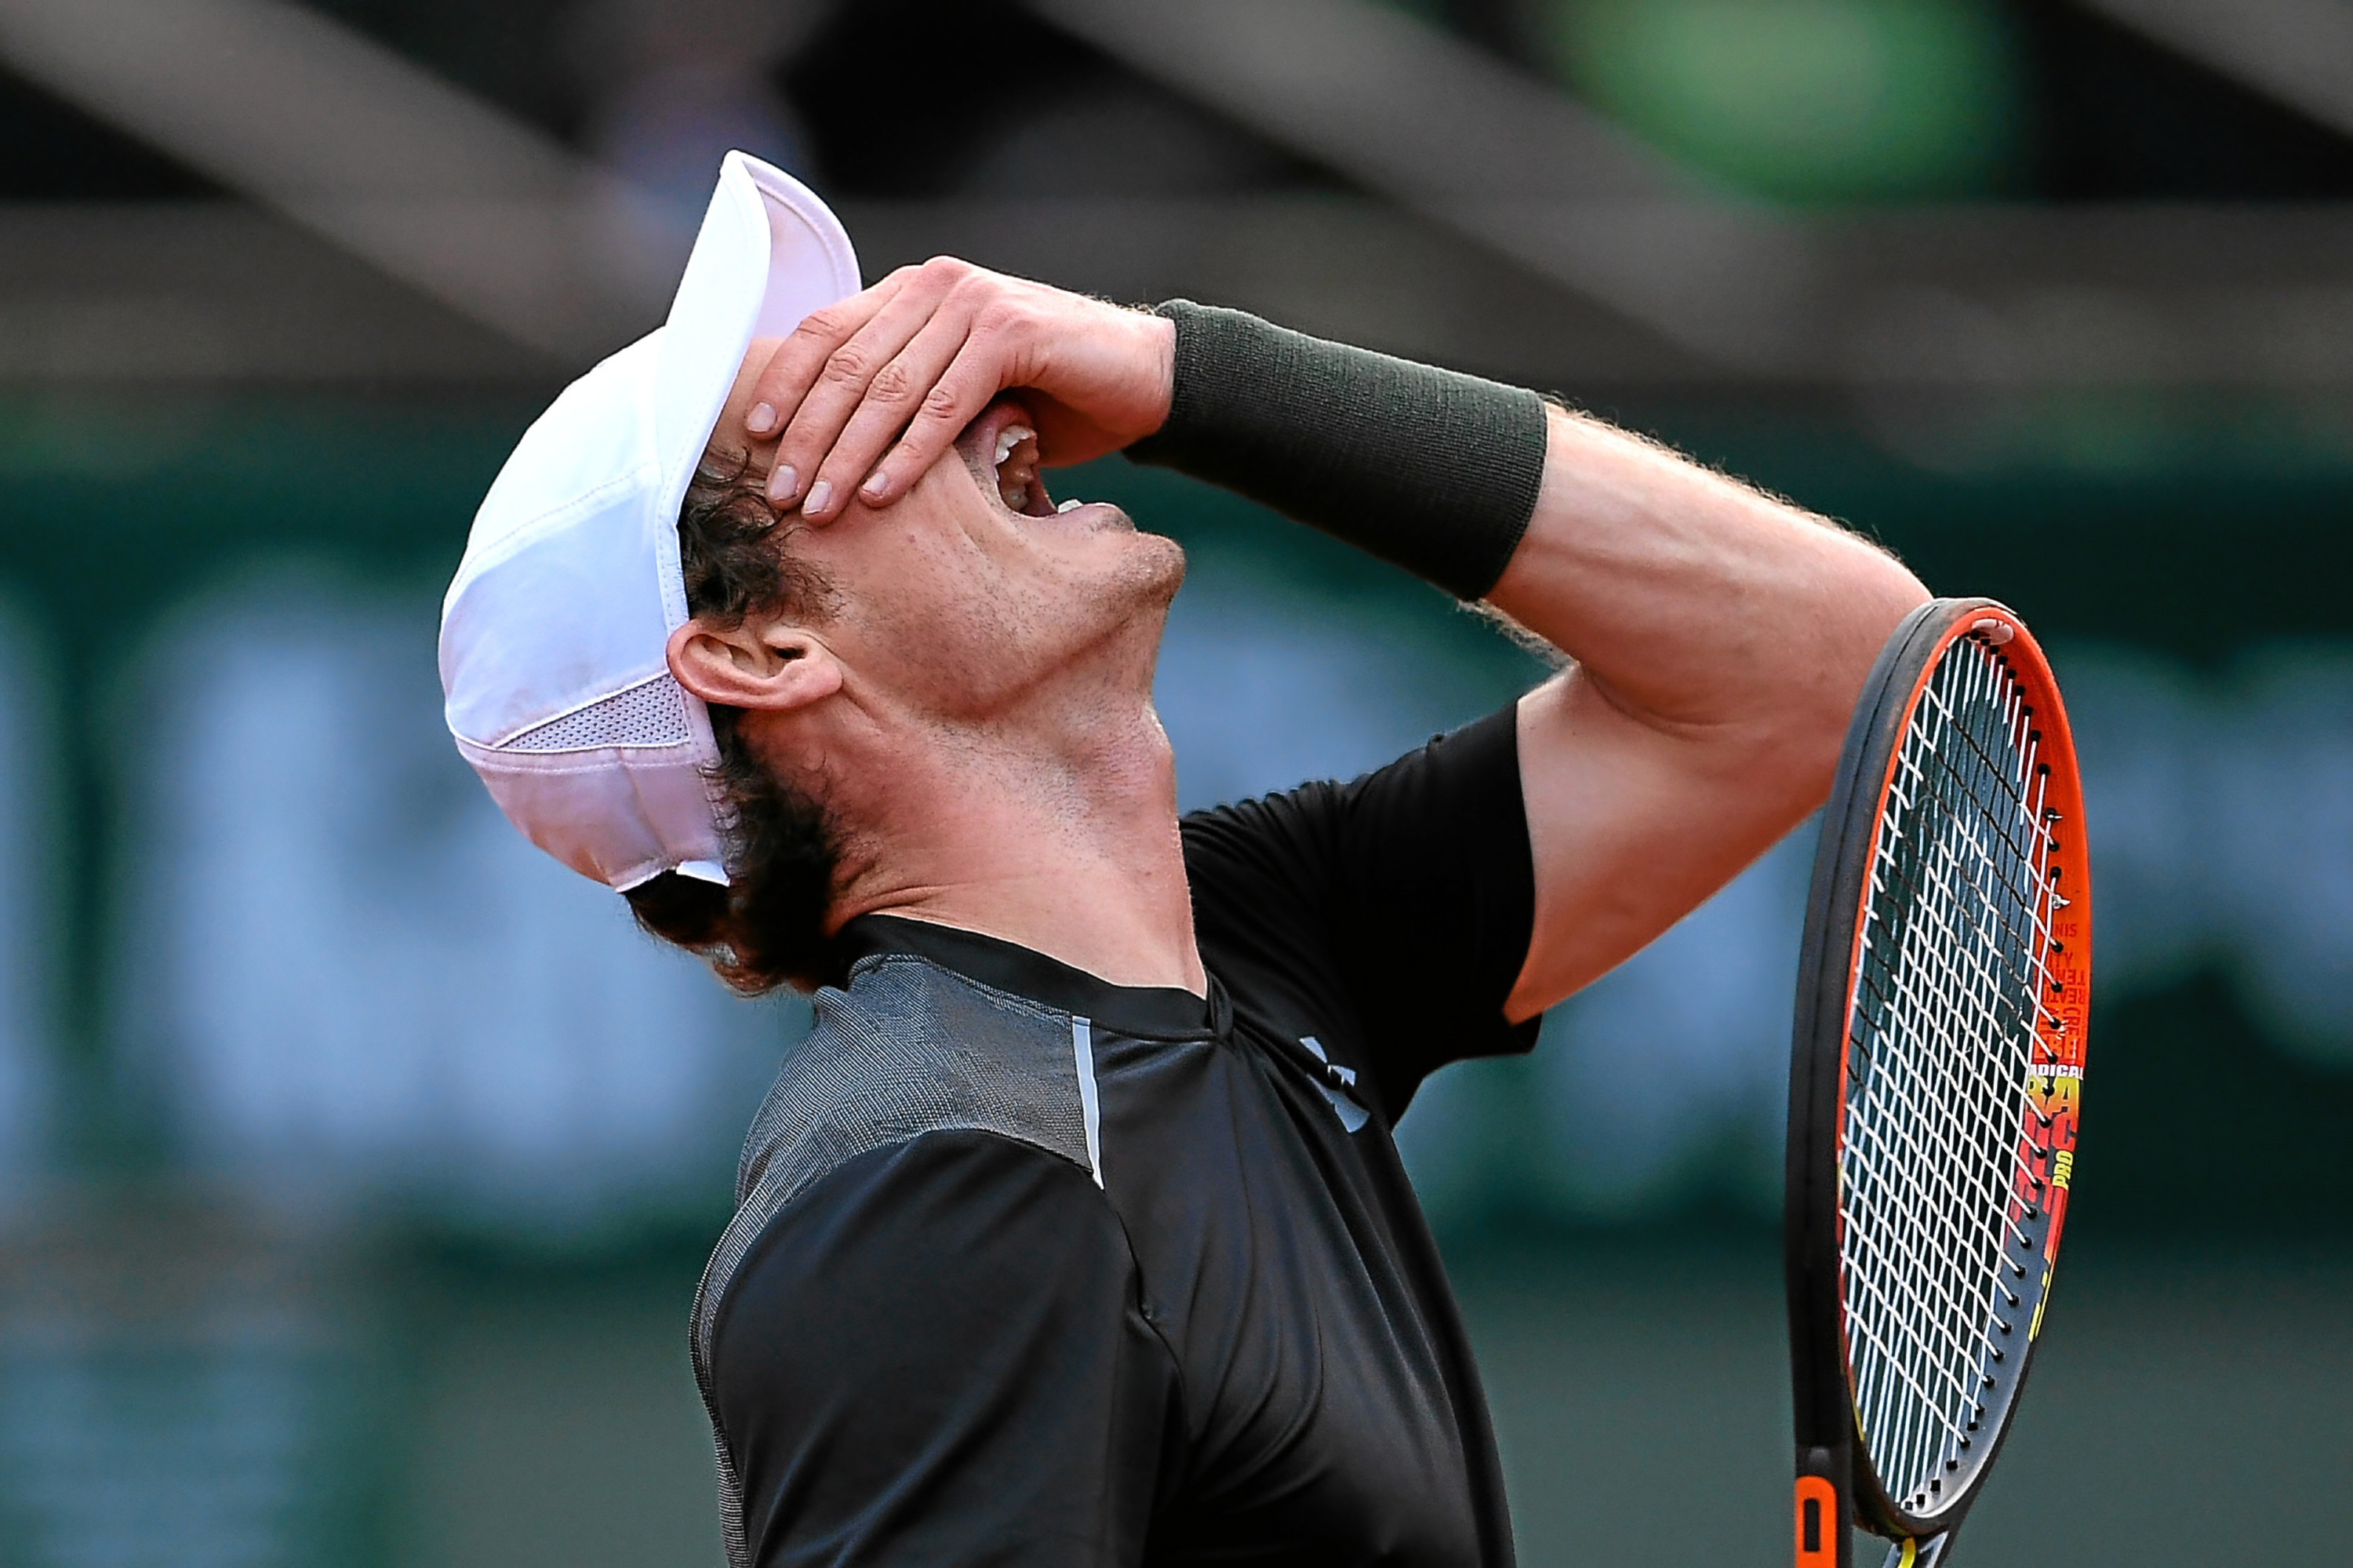 Andy Murray struggles to find his game.